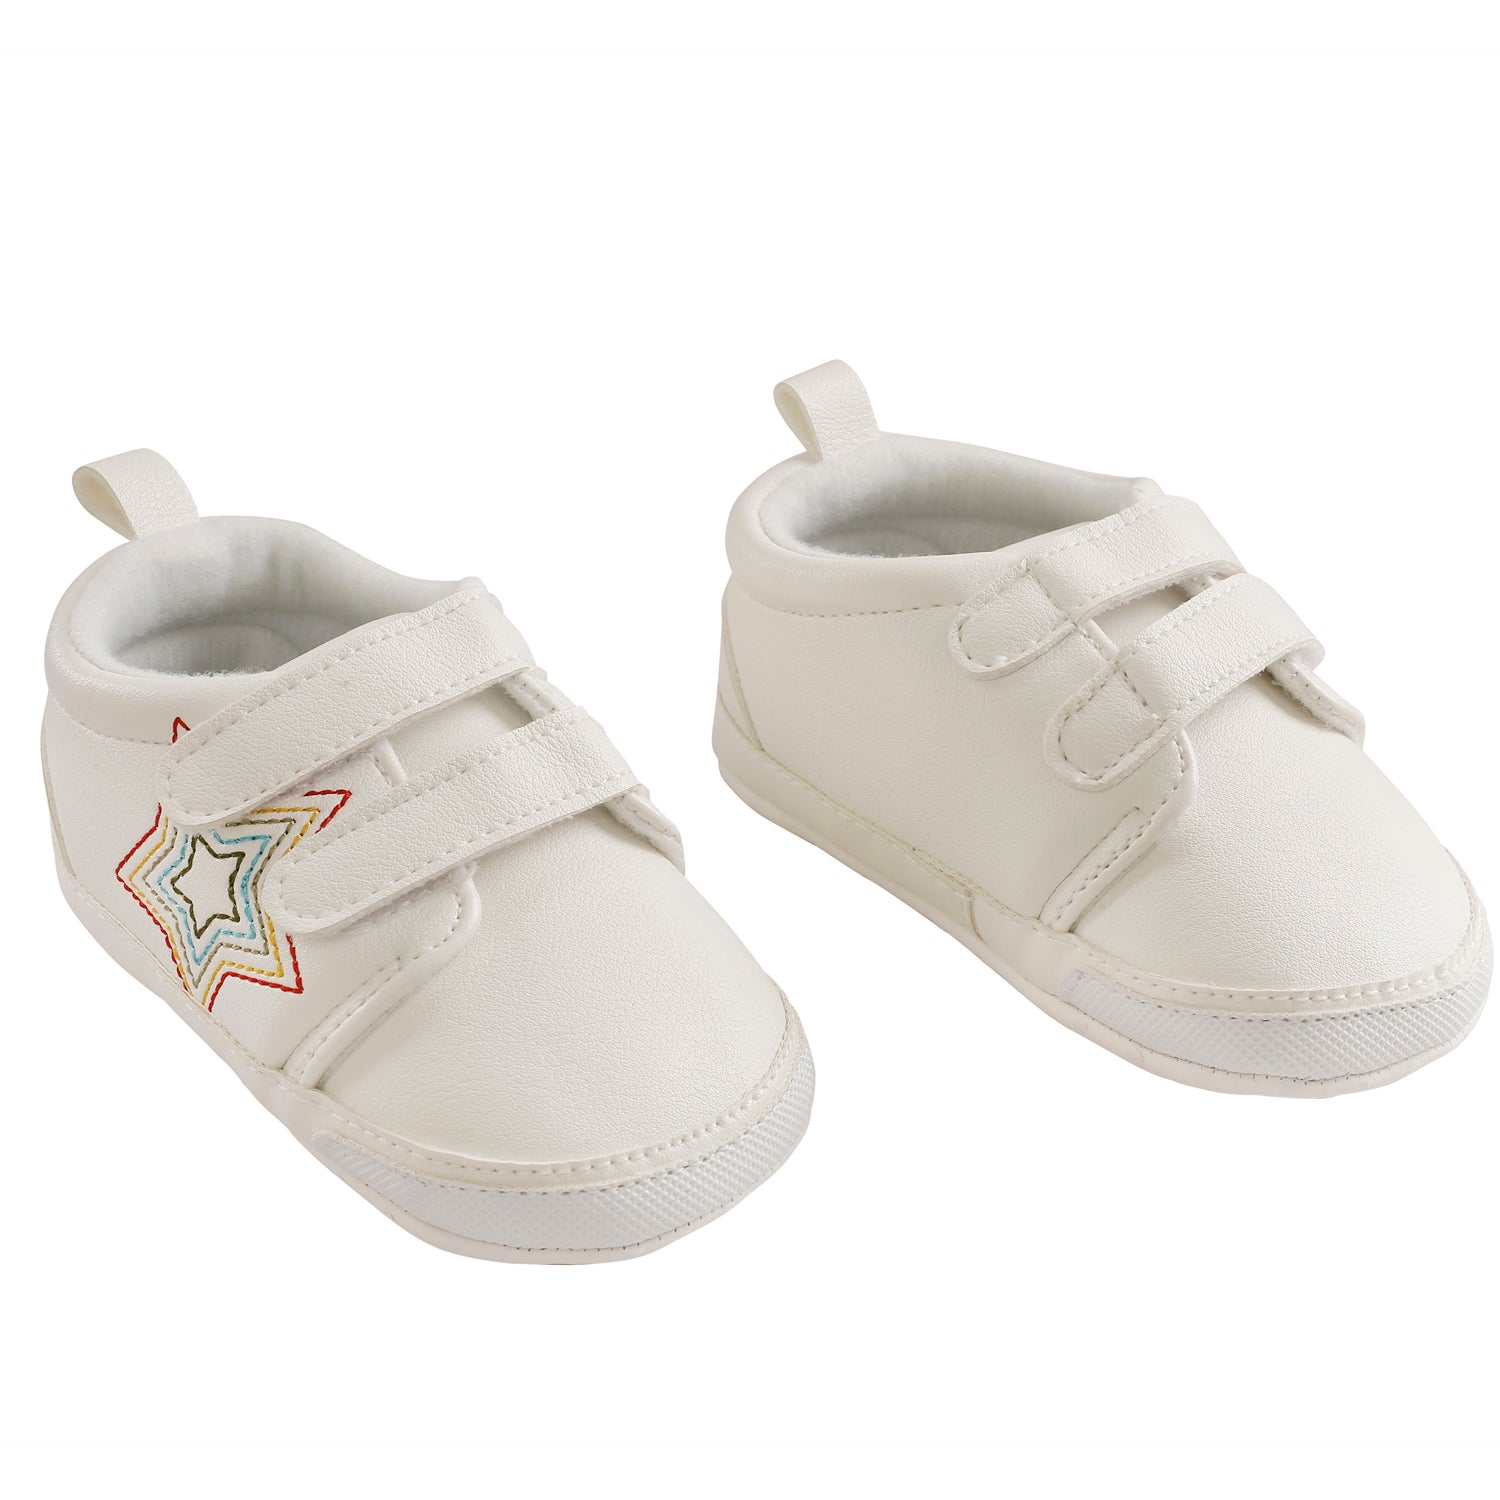 My Star White Casual Booties - Baby Moo